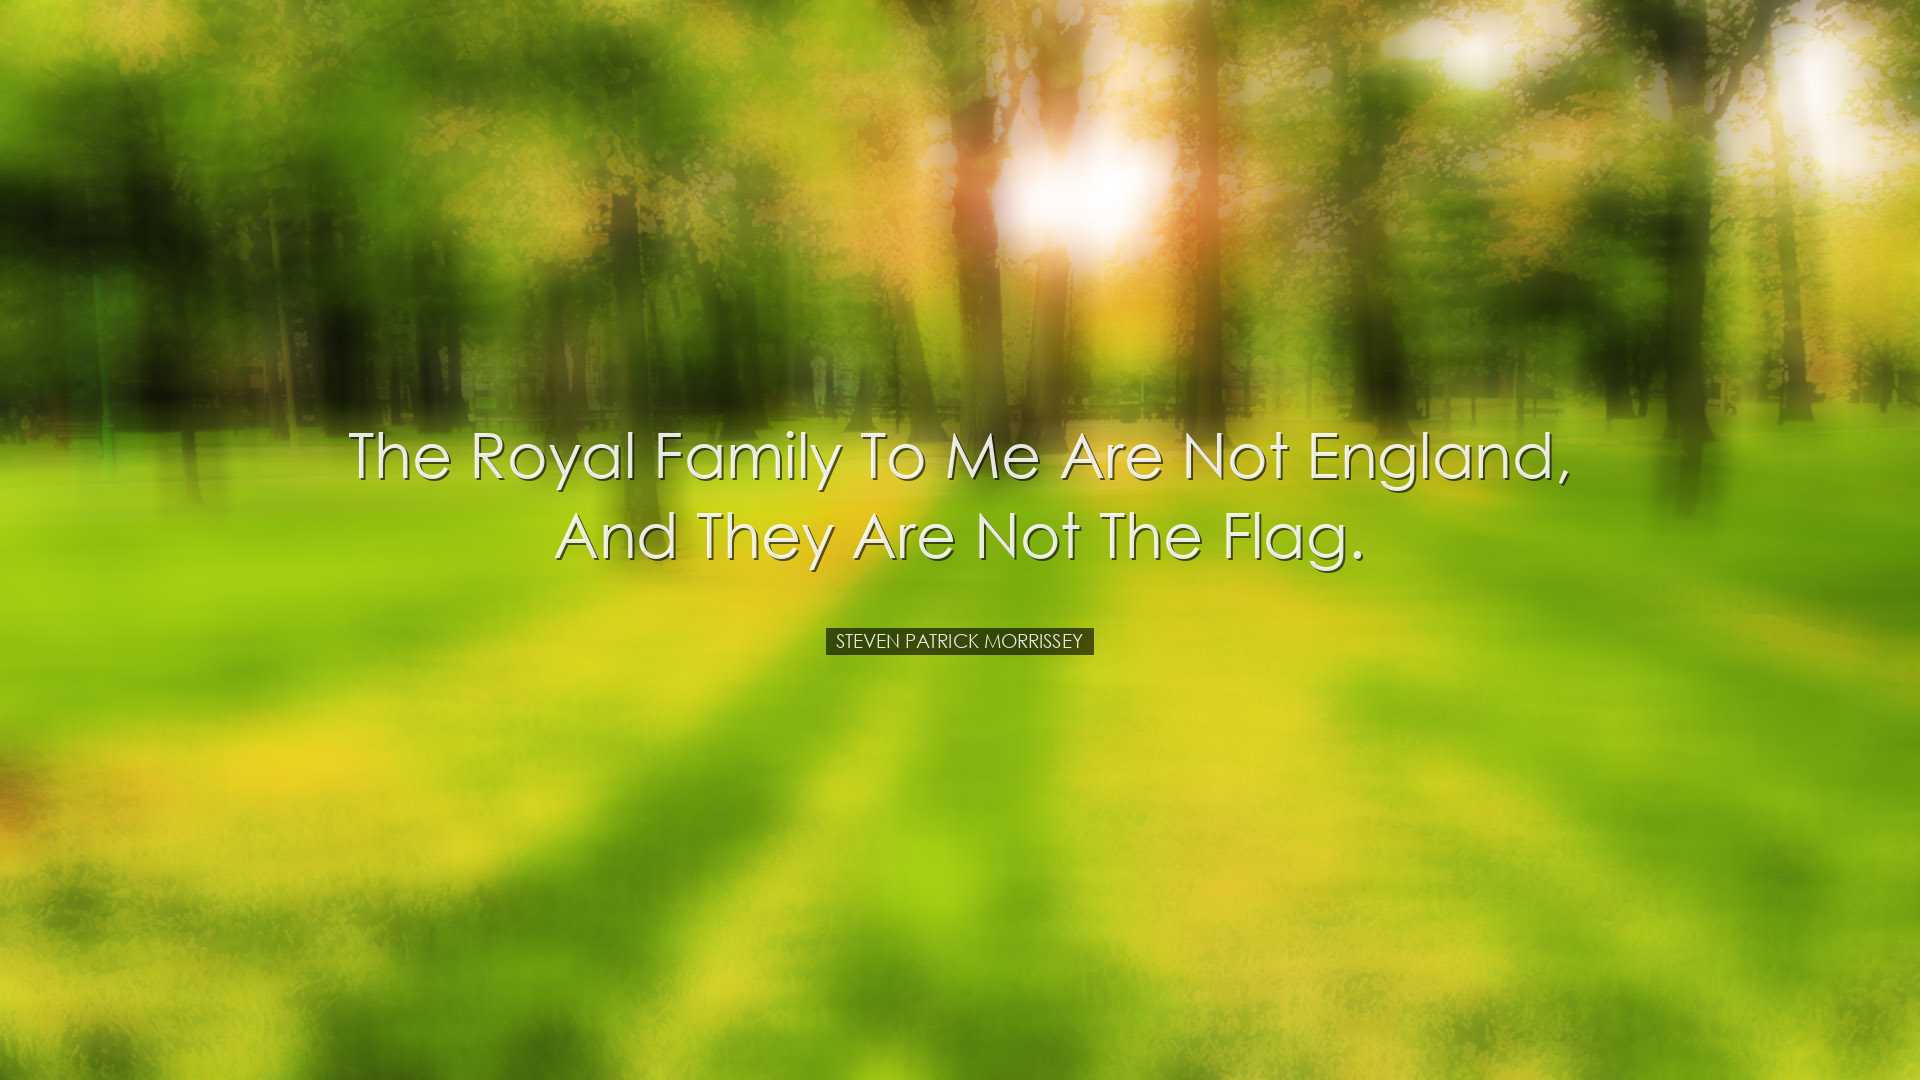 The Royal family to me are not England, and they are not the flag.